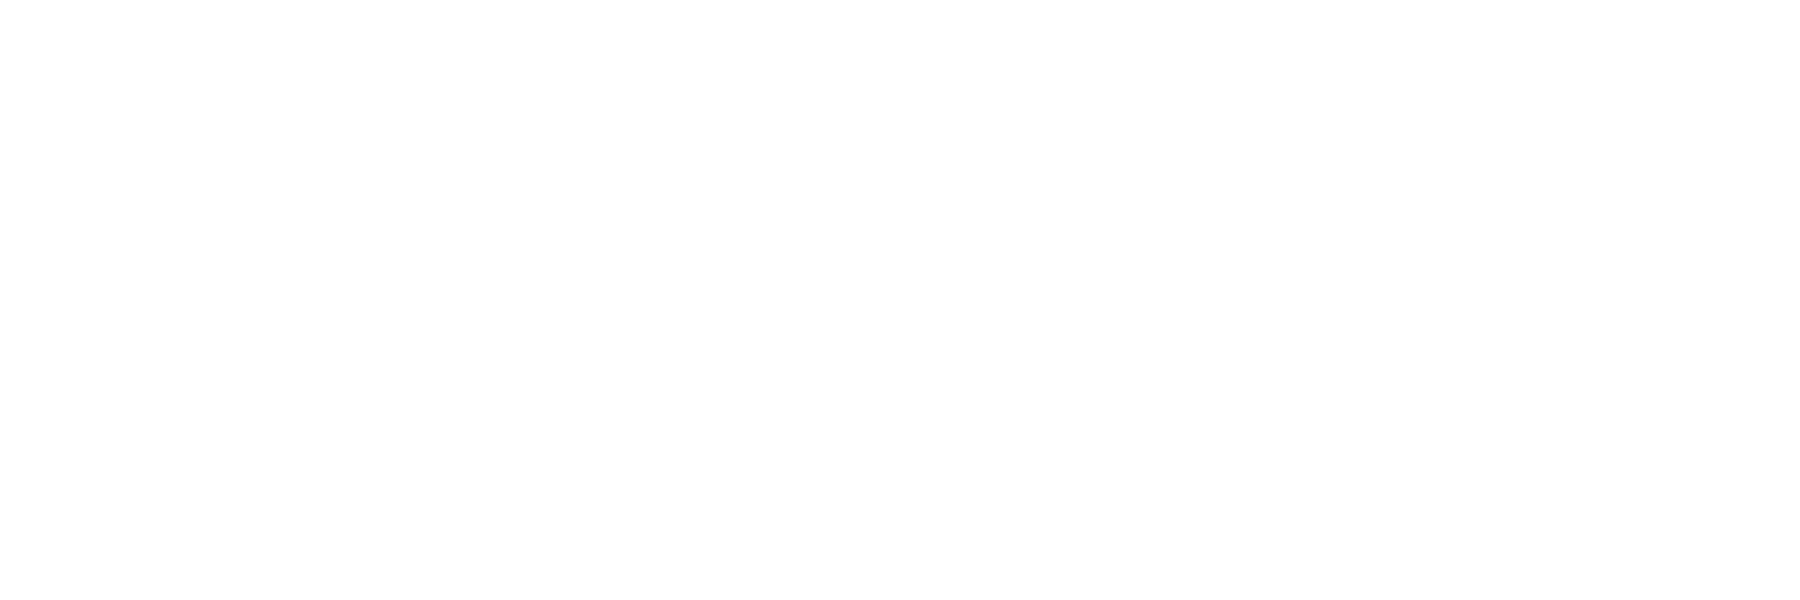 Chatbottery